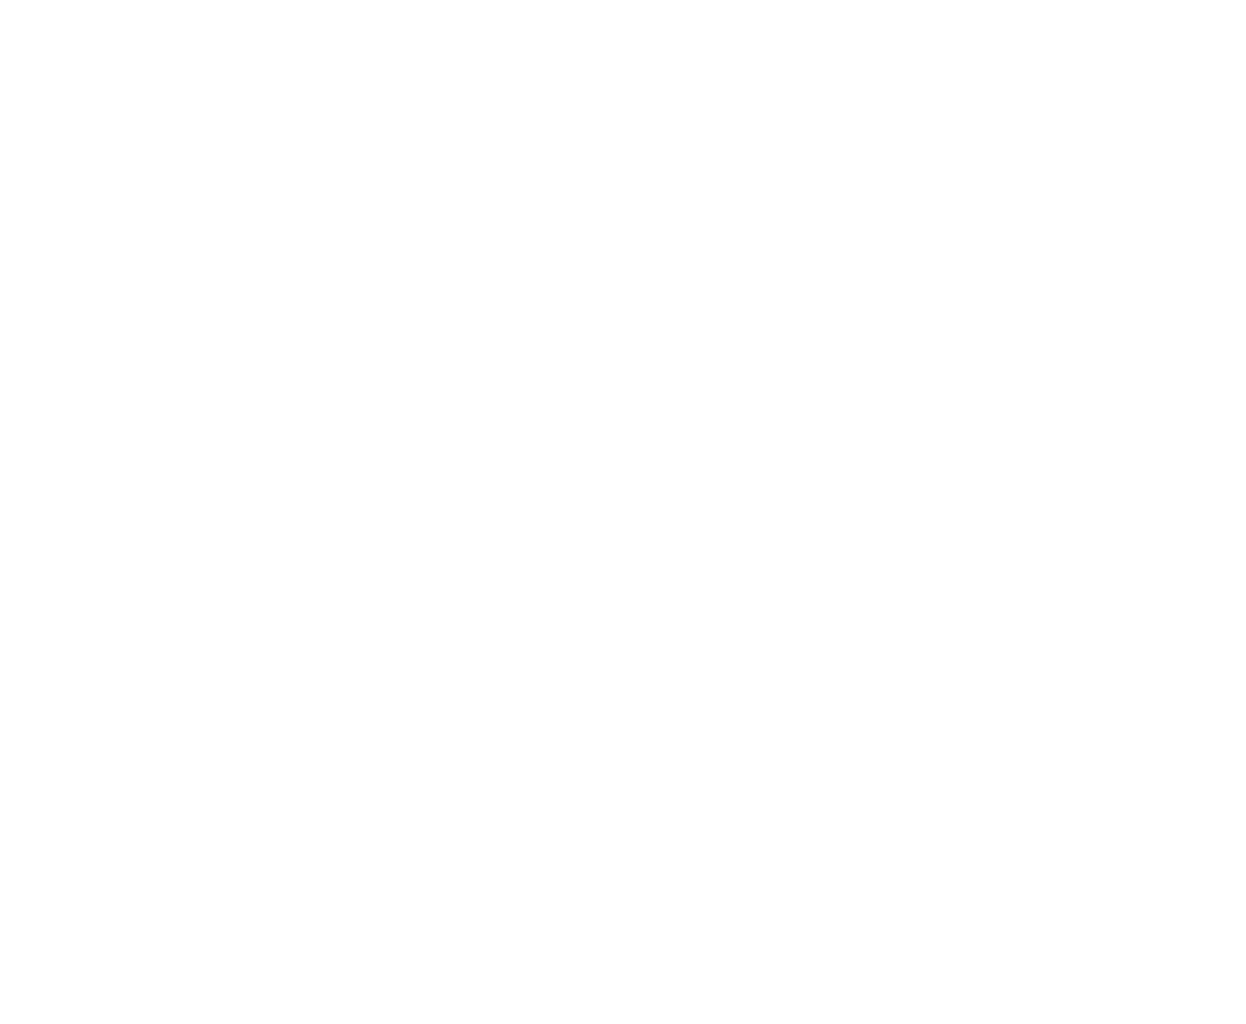 Texas A&M White 2.png